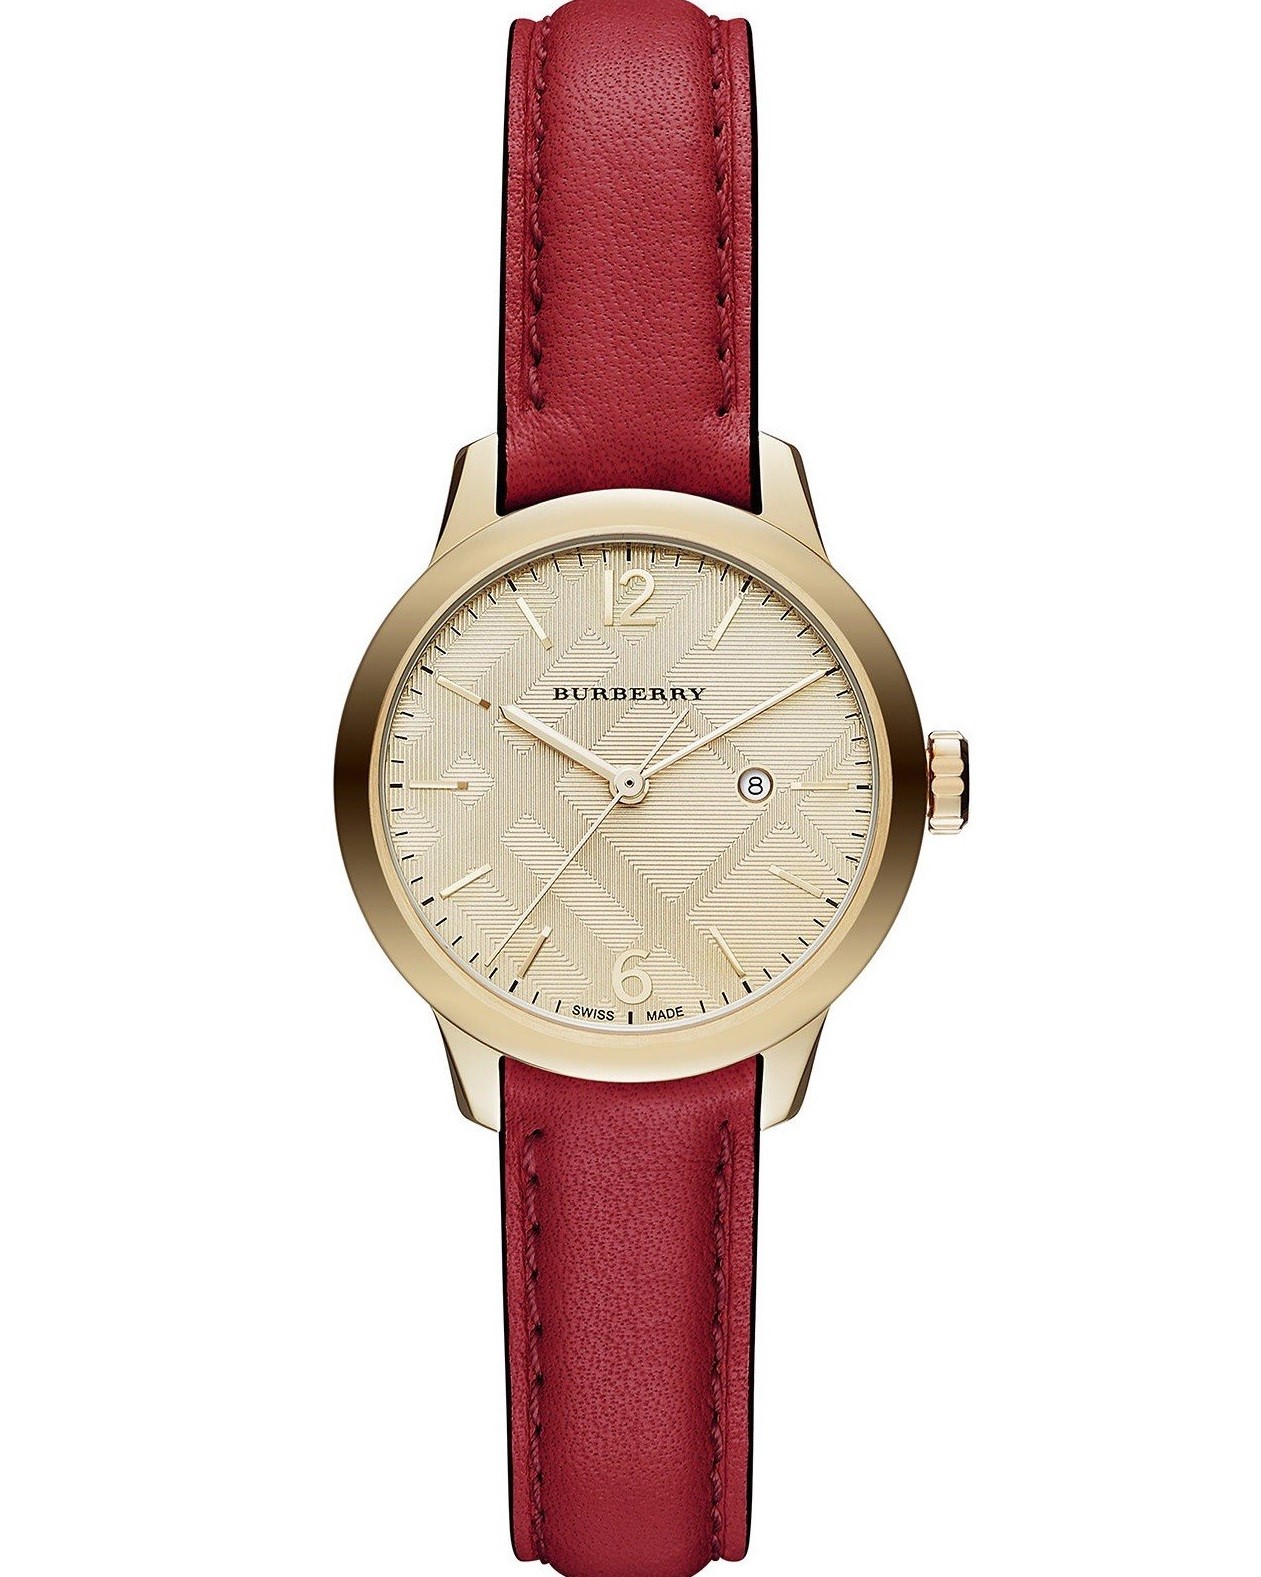 ĐỒNG HỒ NỮ DÂY DA BURBERRY THE CLASSIC ROUND RED LEATHER STRAP LADIES WATCH BU10102 4